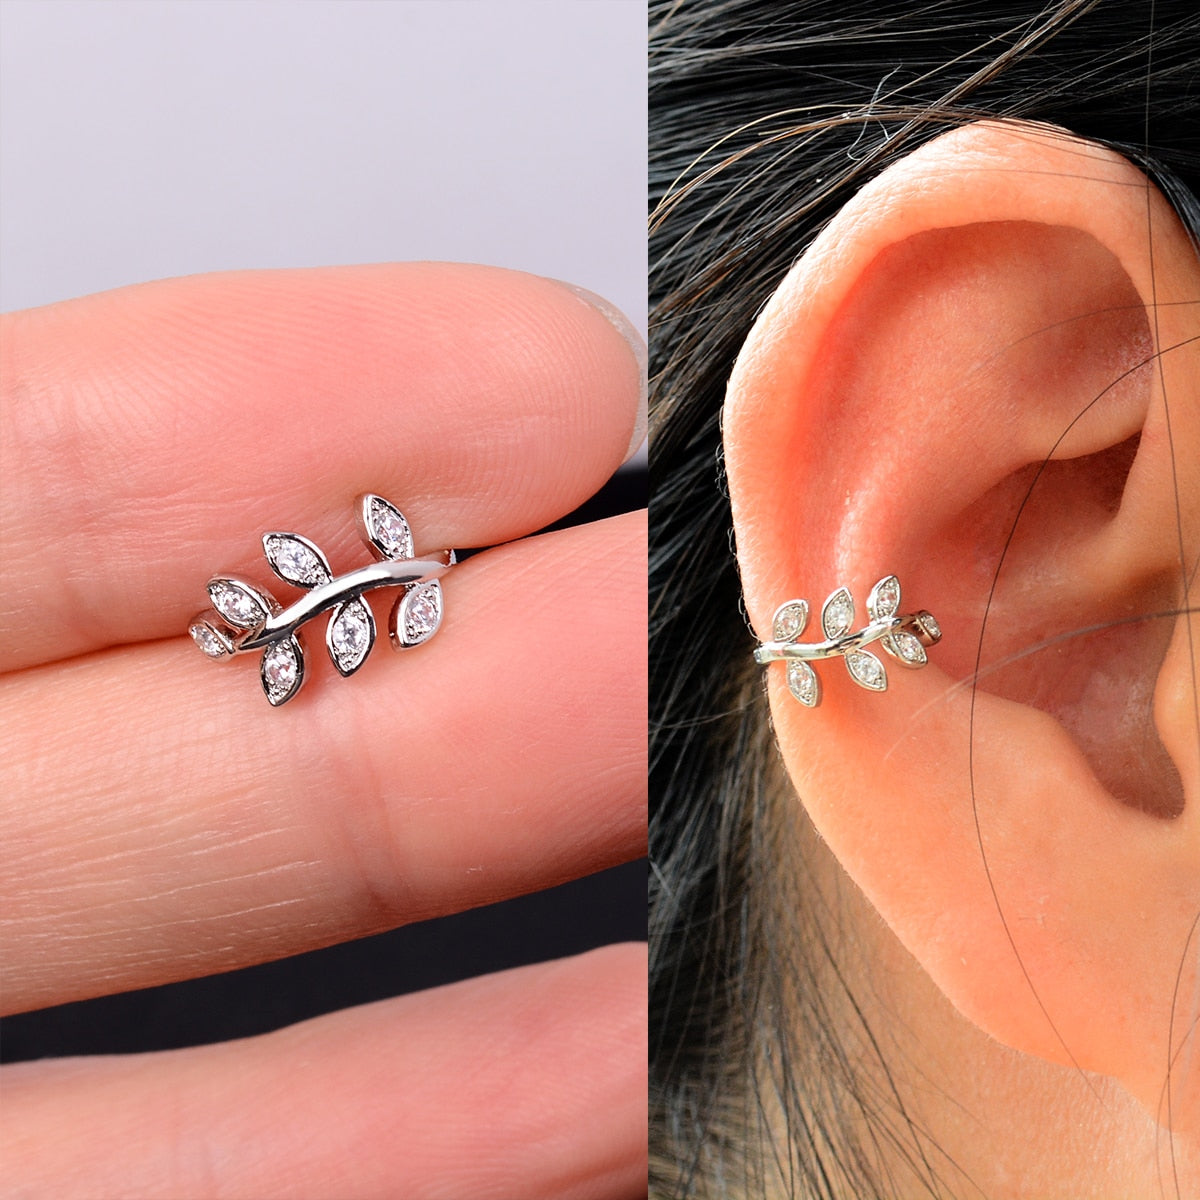 1Pcs Hot Sale Cute Metal Leaf Earcuff Clips On Earring for Women Girls No Fake Piercing Cartilage Earrings Ear Ring Without Hole - Charlie Dolly